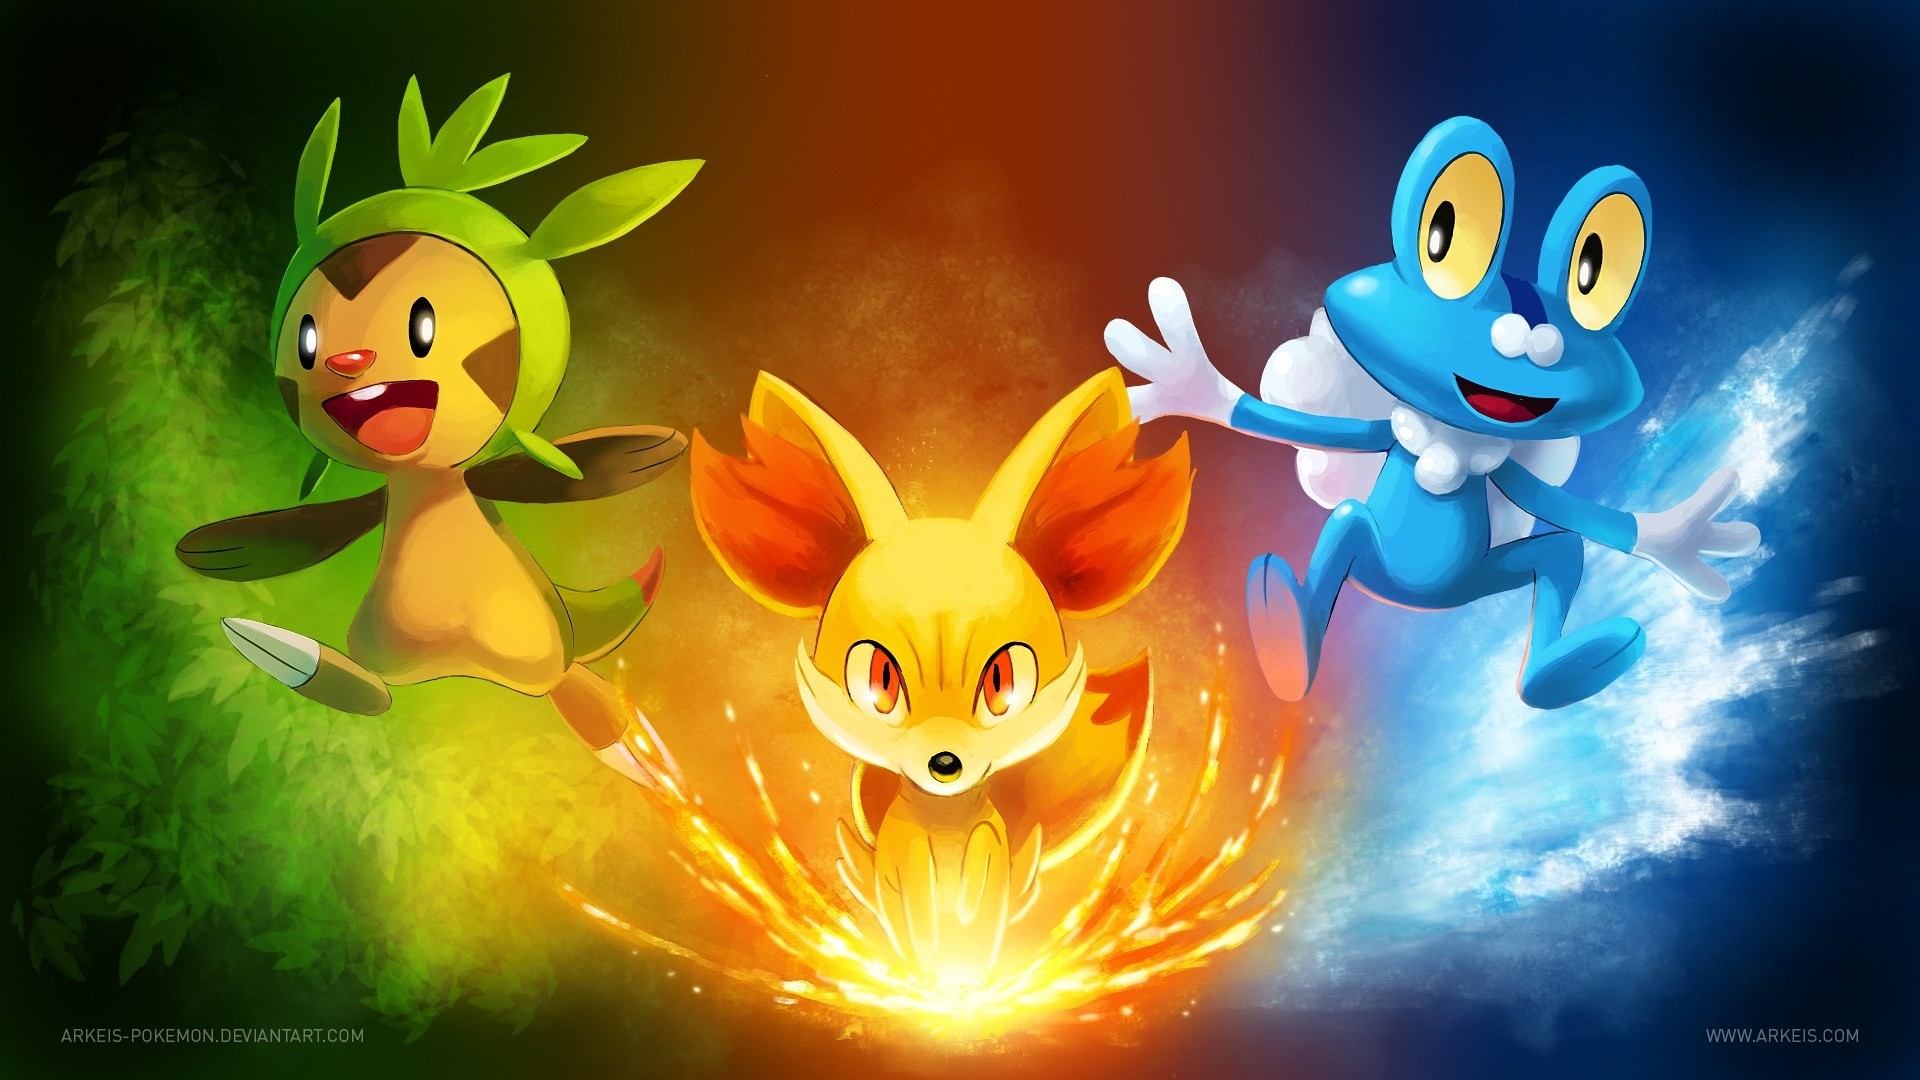 1920x1080 ... Great Cute Pokemon Wallpaper Free Wallpaper For Desktop and Mobile in  All Resolutions Free Download 3d